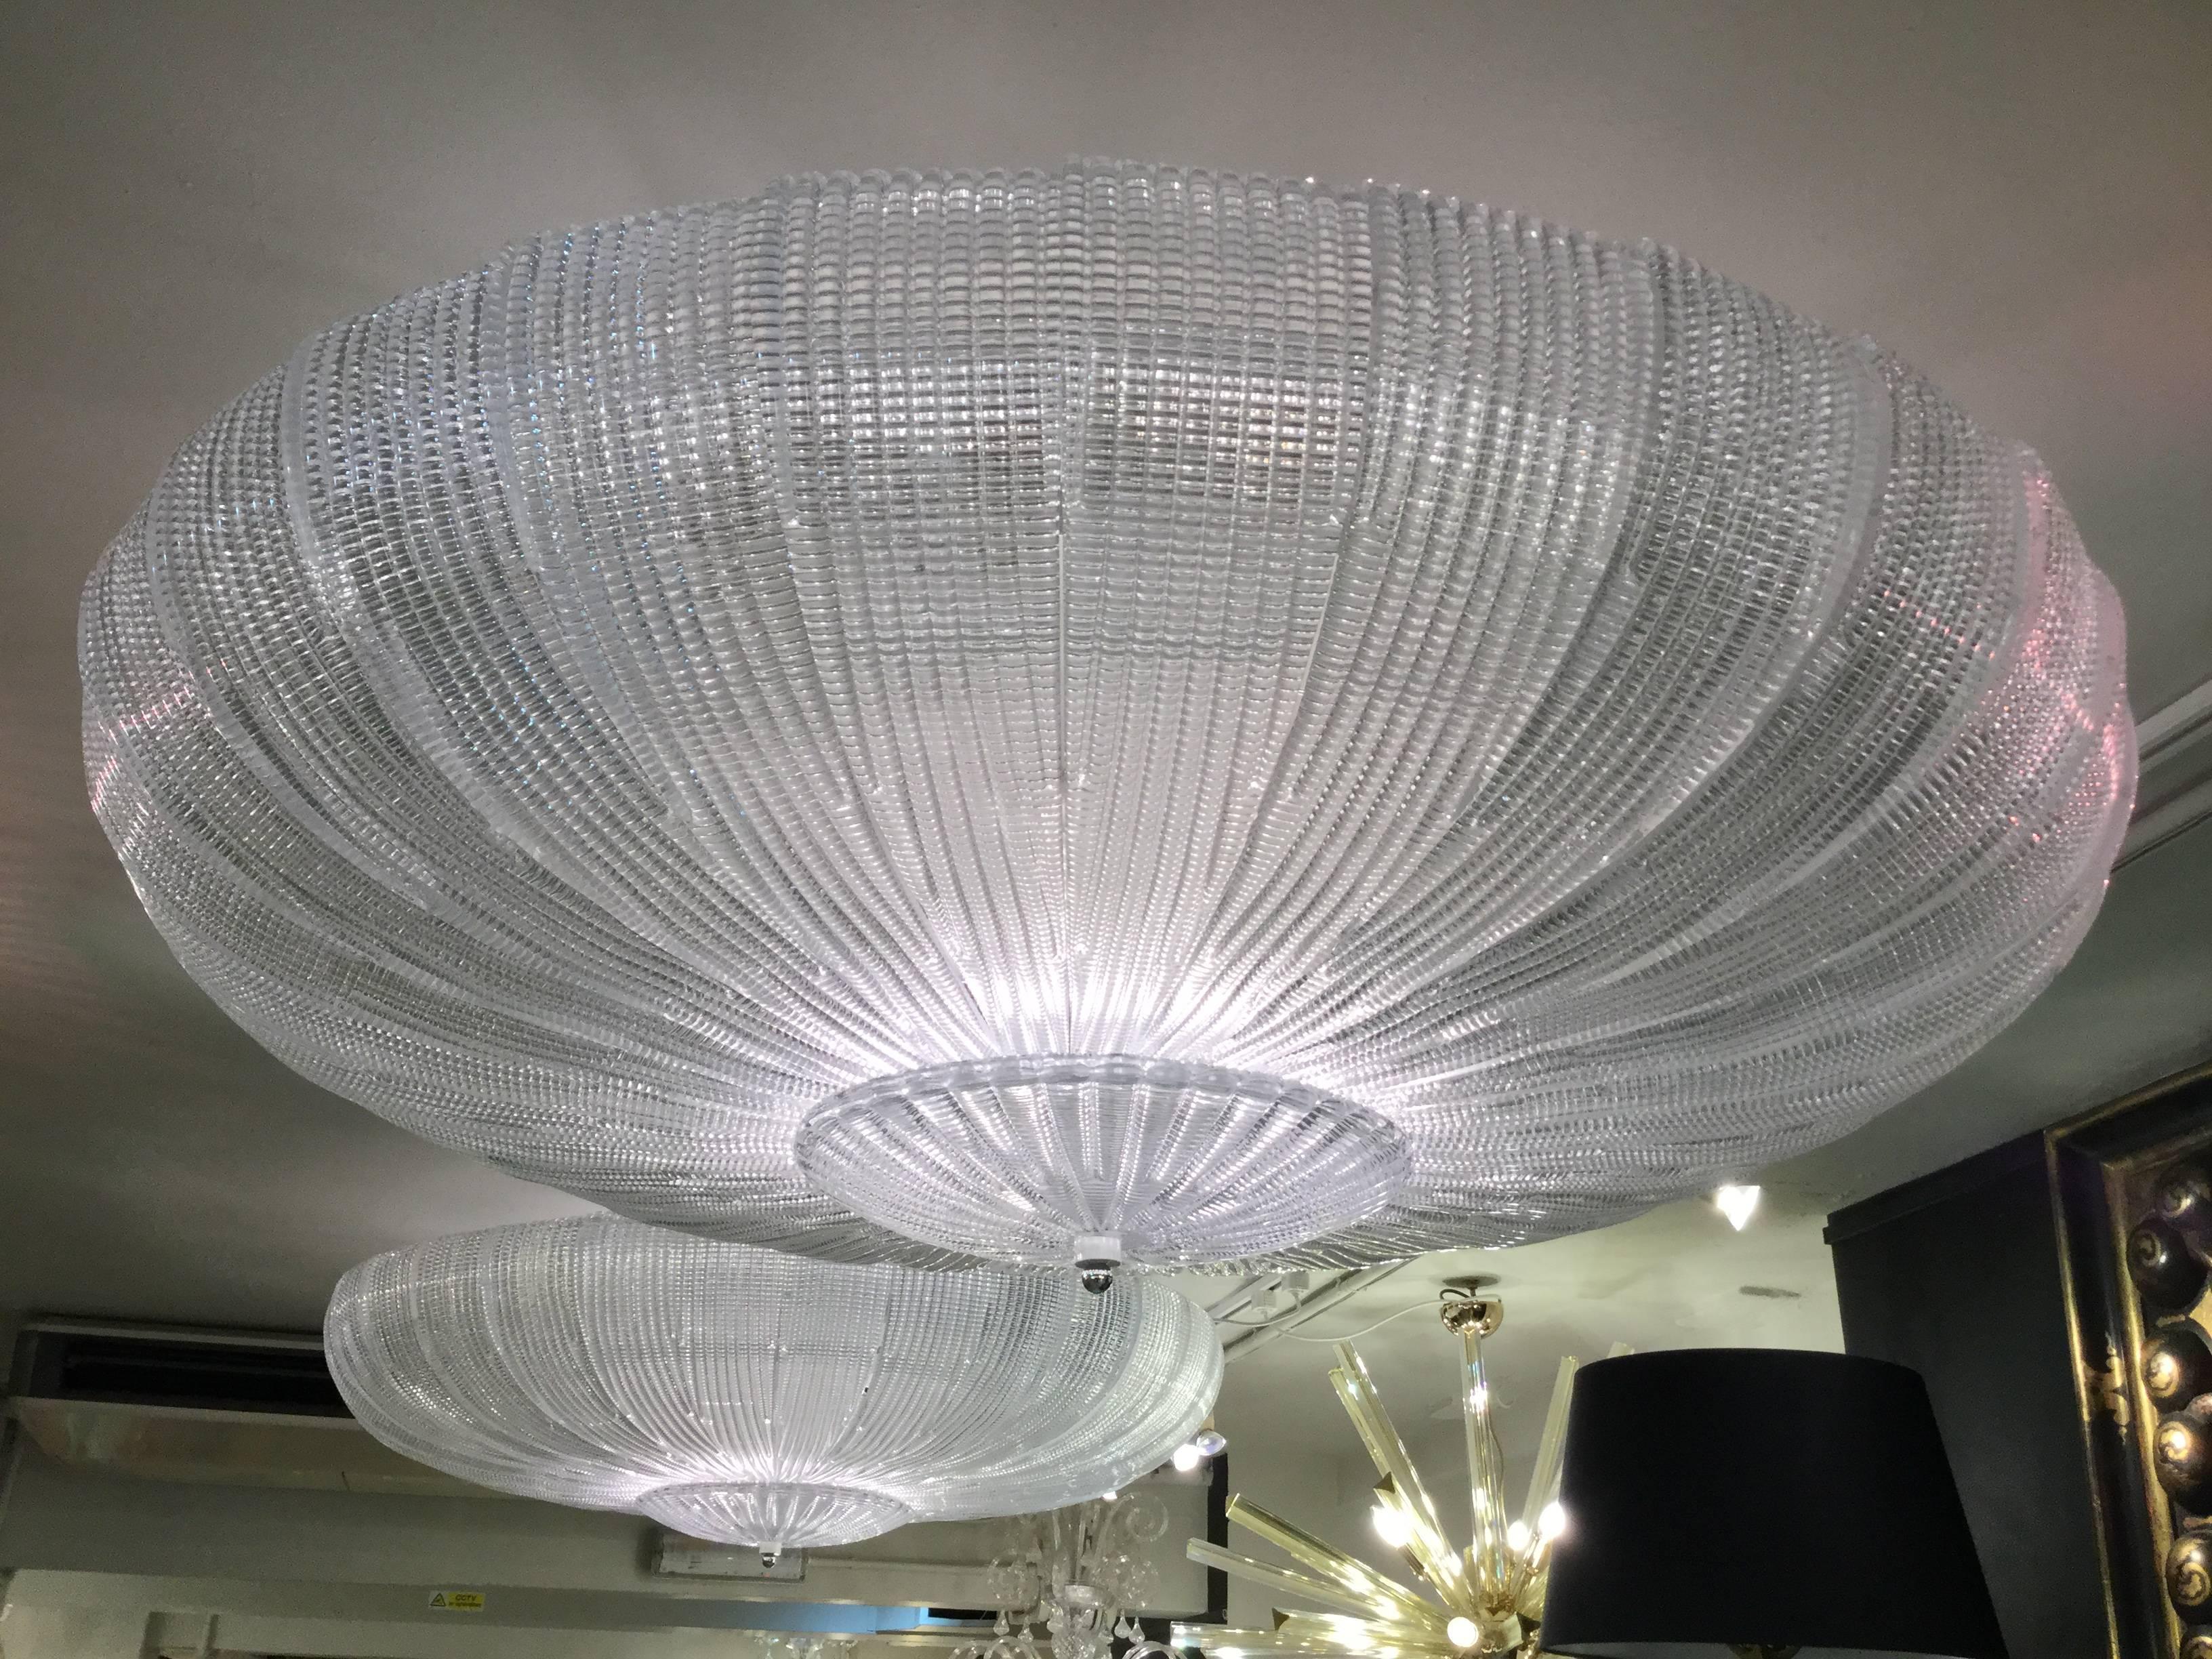 Fantastic Murano glass ceiling lights. The  lamp is made of 26 mouth-blown hand-formed leaf-form ice glass panels plus a huge glass dish as a bottom. The wiring is perfect, which has been replaced in recent time, so the lamp is in fine working